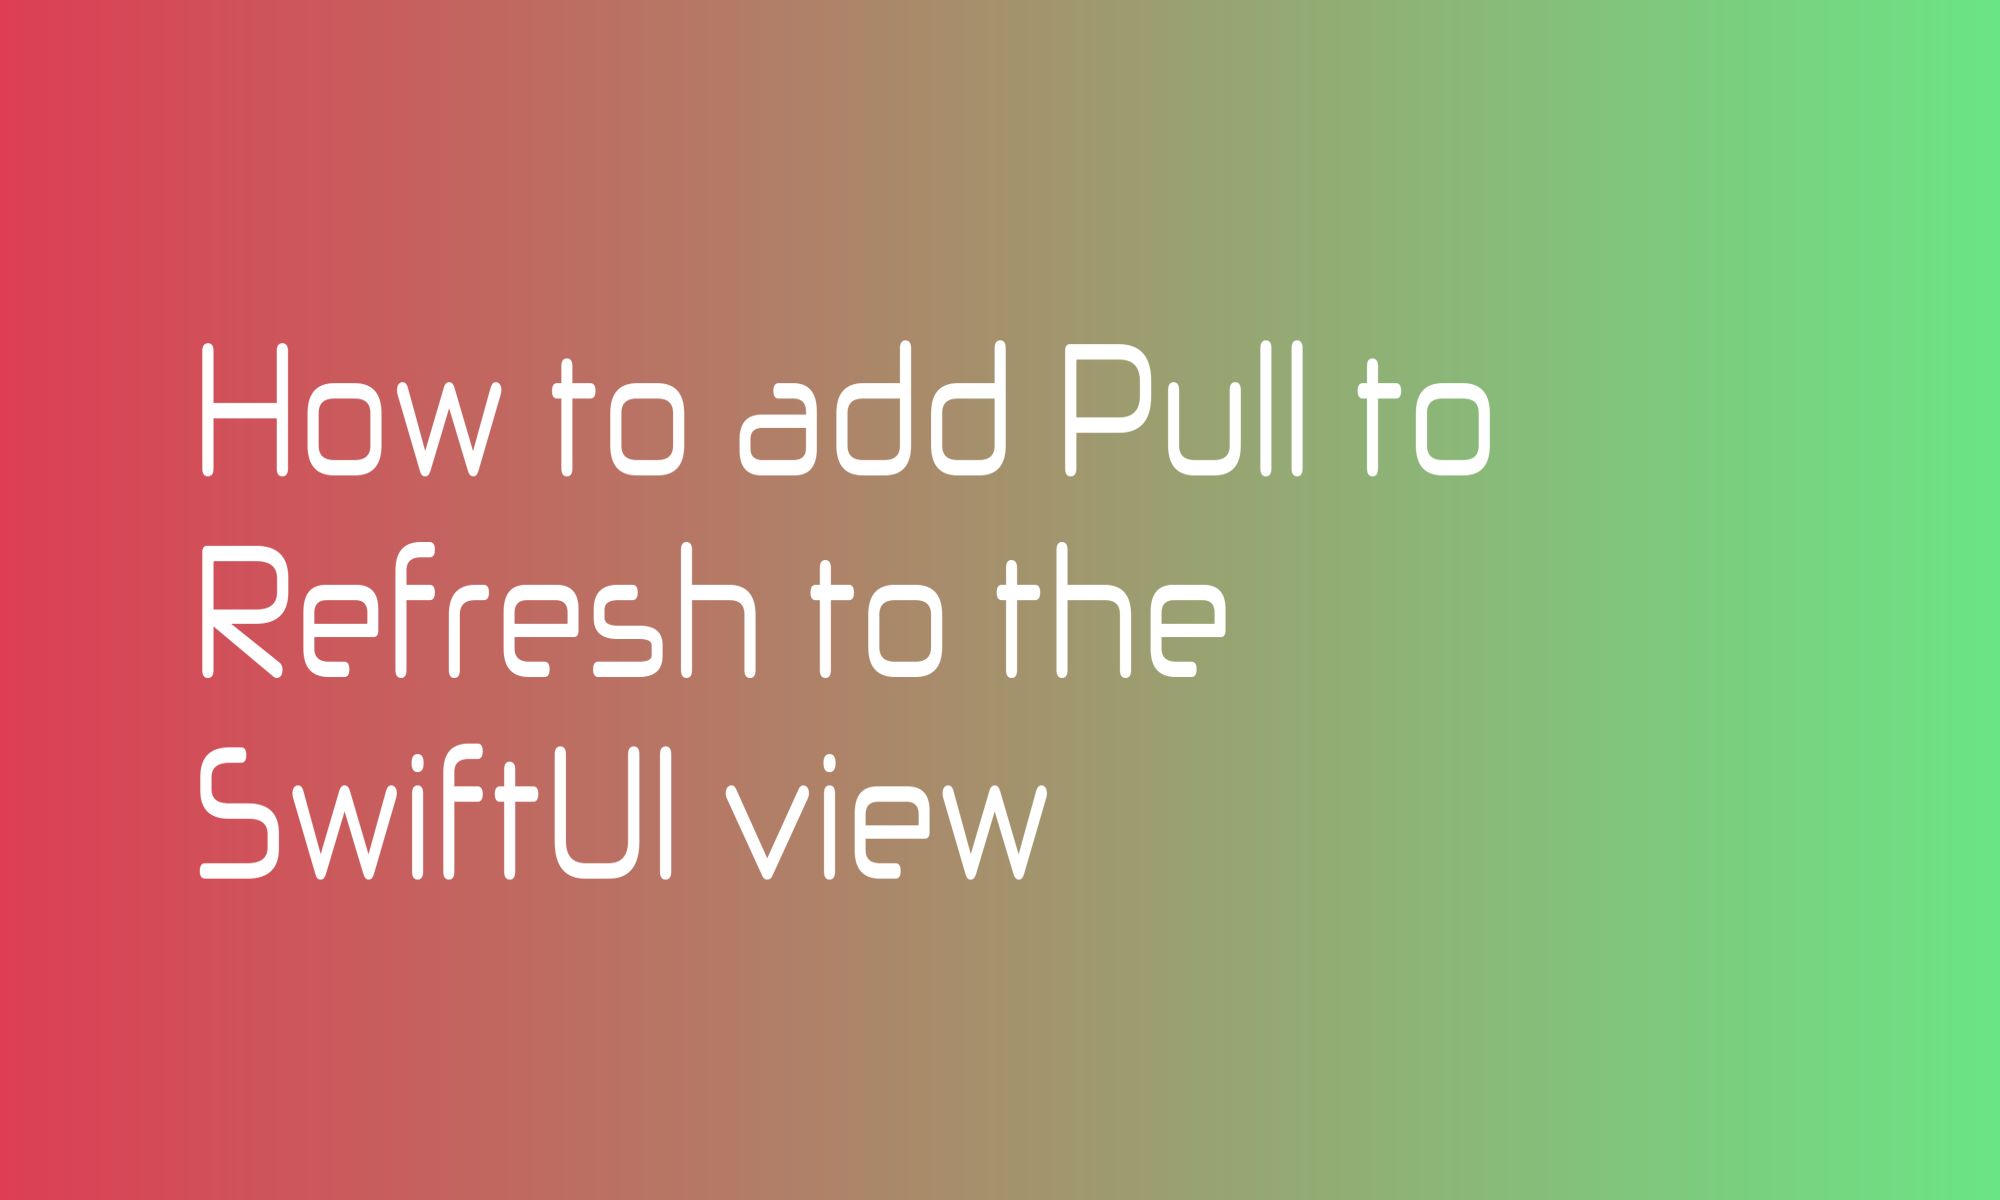 How to add Pull to Refresh to the SwiftUI view